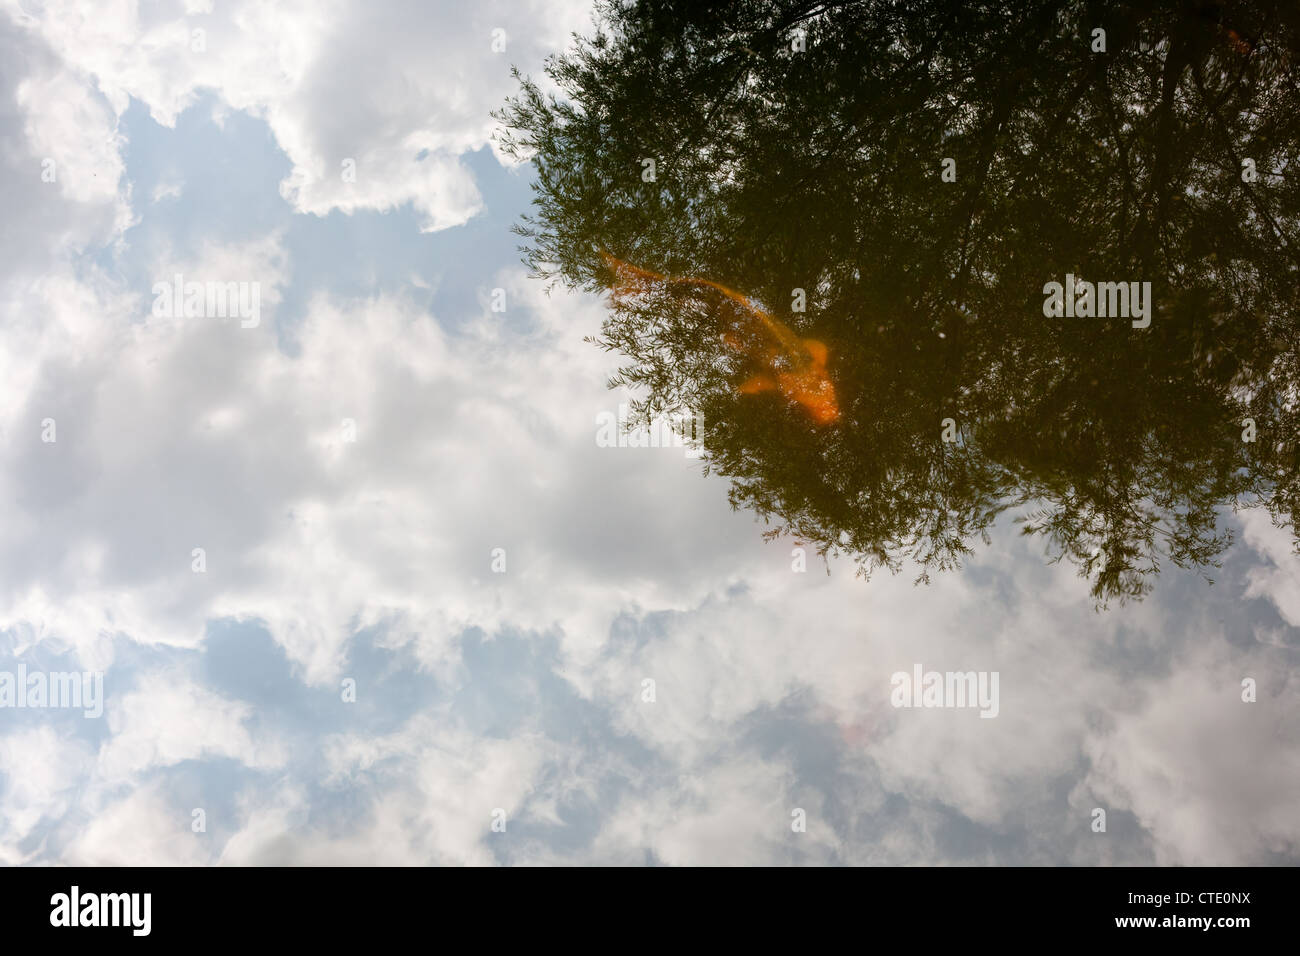 Red fish in a lake; reflection in water from tree and sky Stock Photo